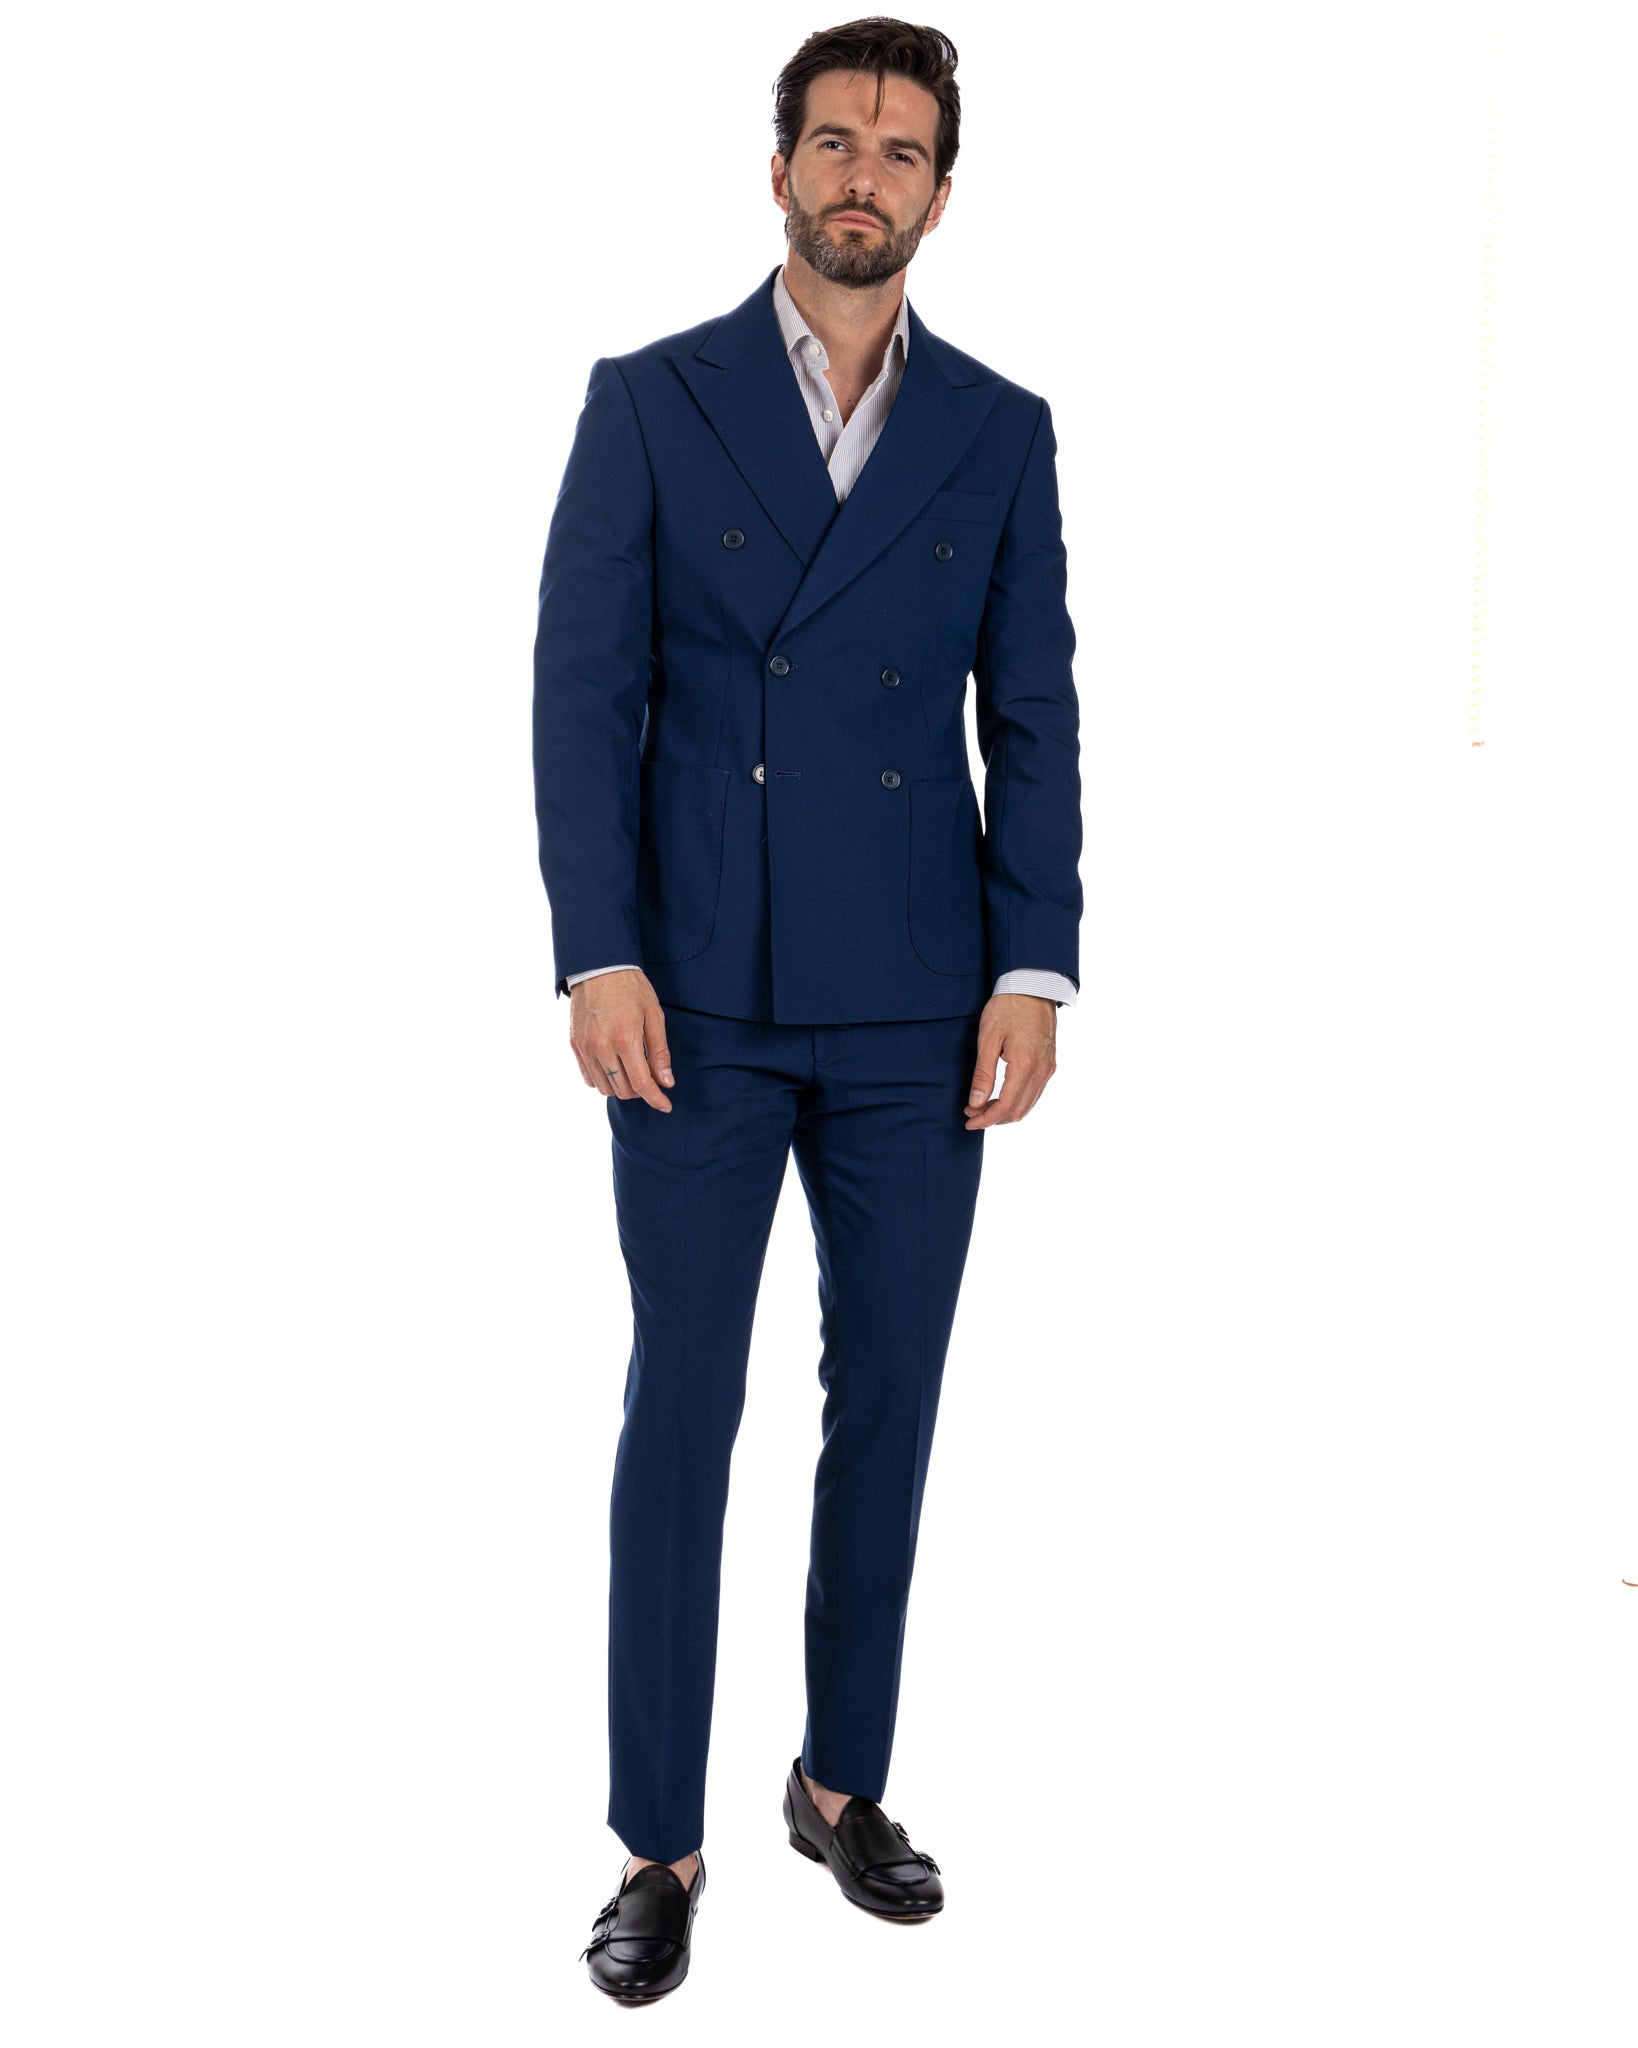 Monaco - blue double-breasted suit